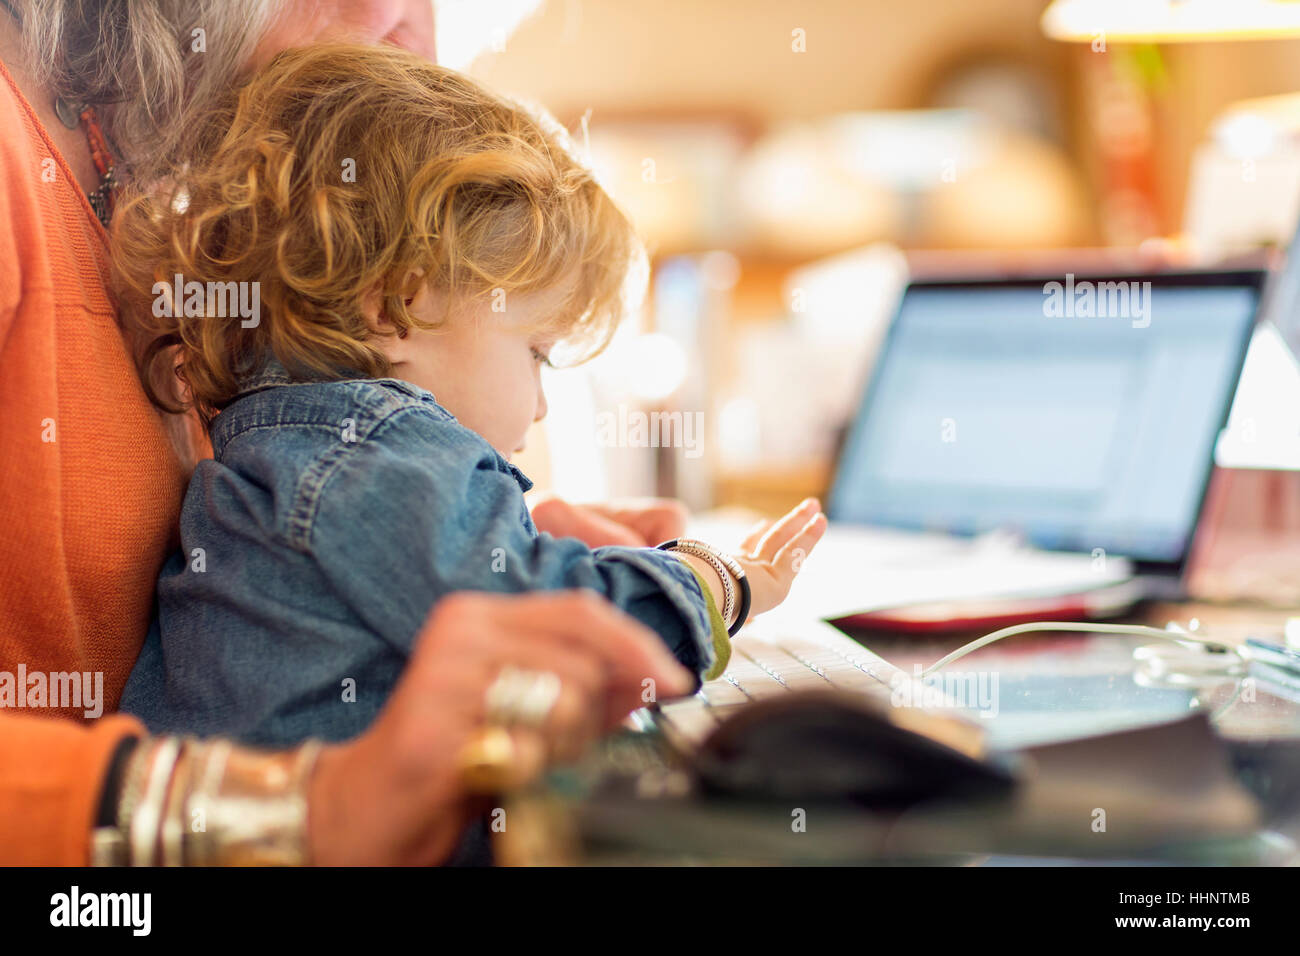 Caucasian baby boy in lap of grandmother using computer keyboard Stock Photo